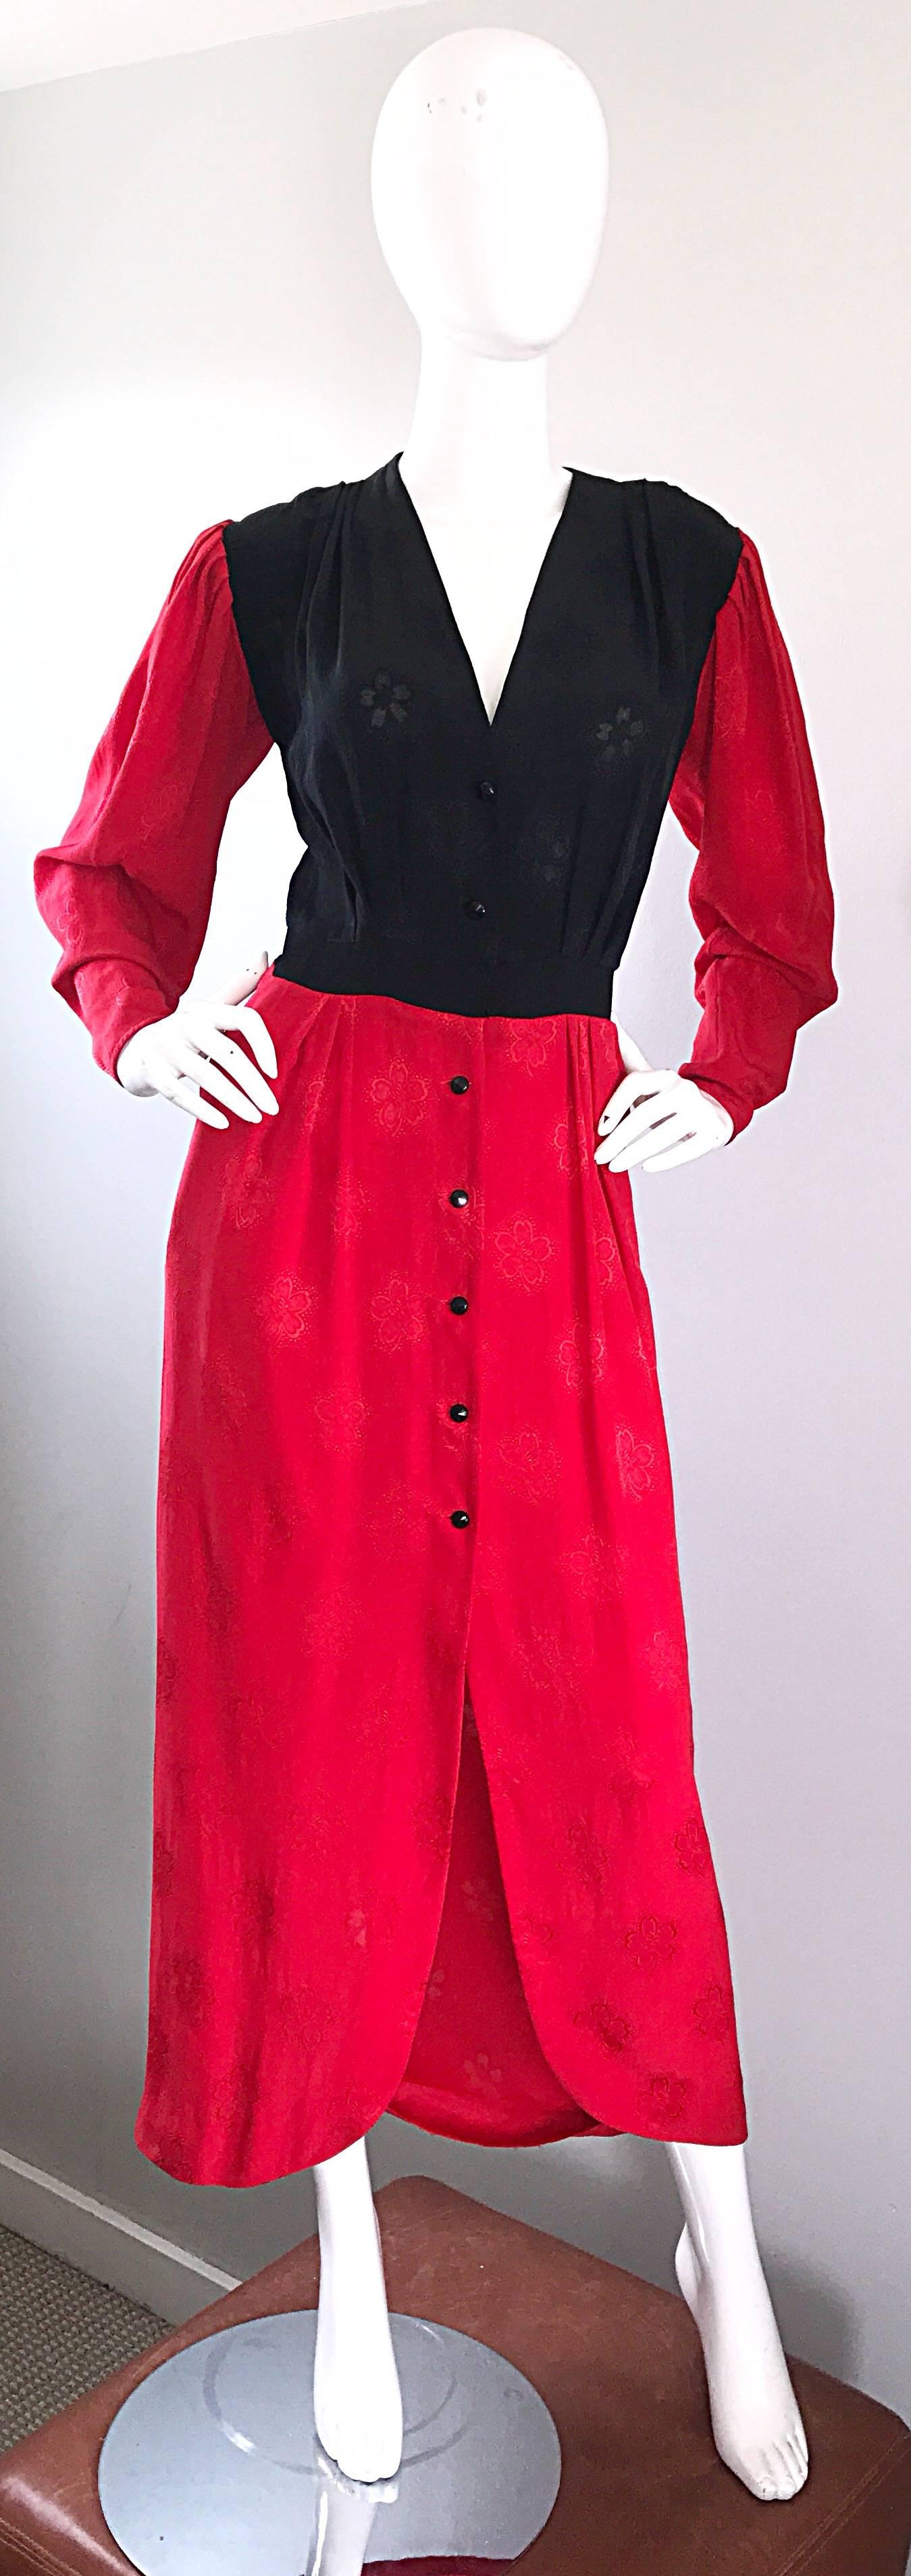 Emanuel Ungaro Vintage Red + Black Color Block 1990s Long Sleeve 90s Silk Dress  In Excellent Condition For Sale In San Diego, CA